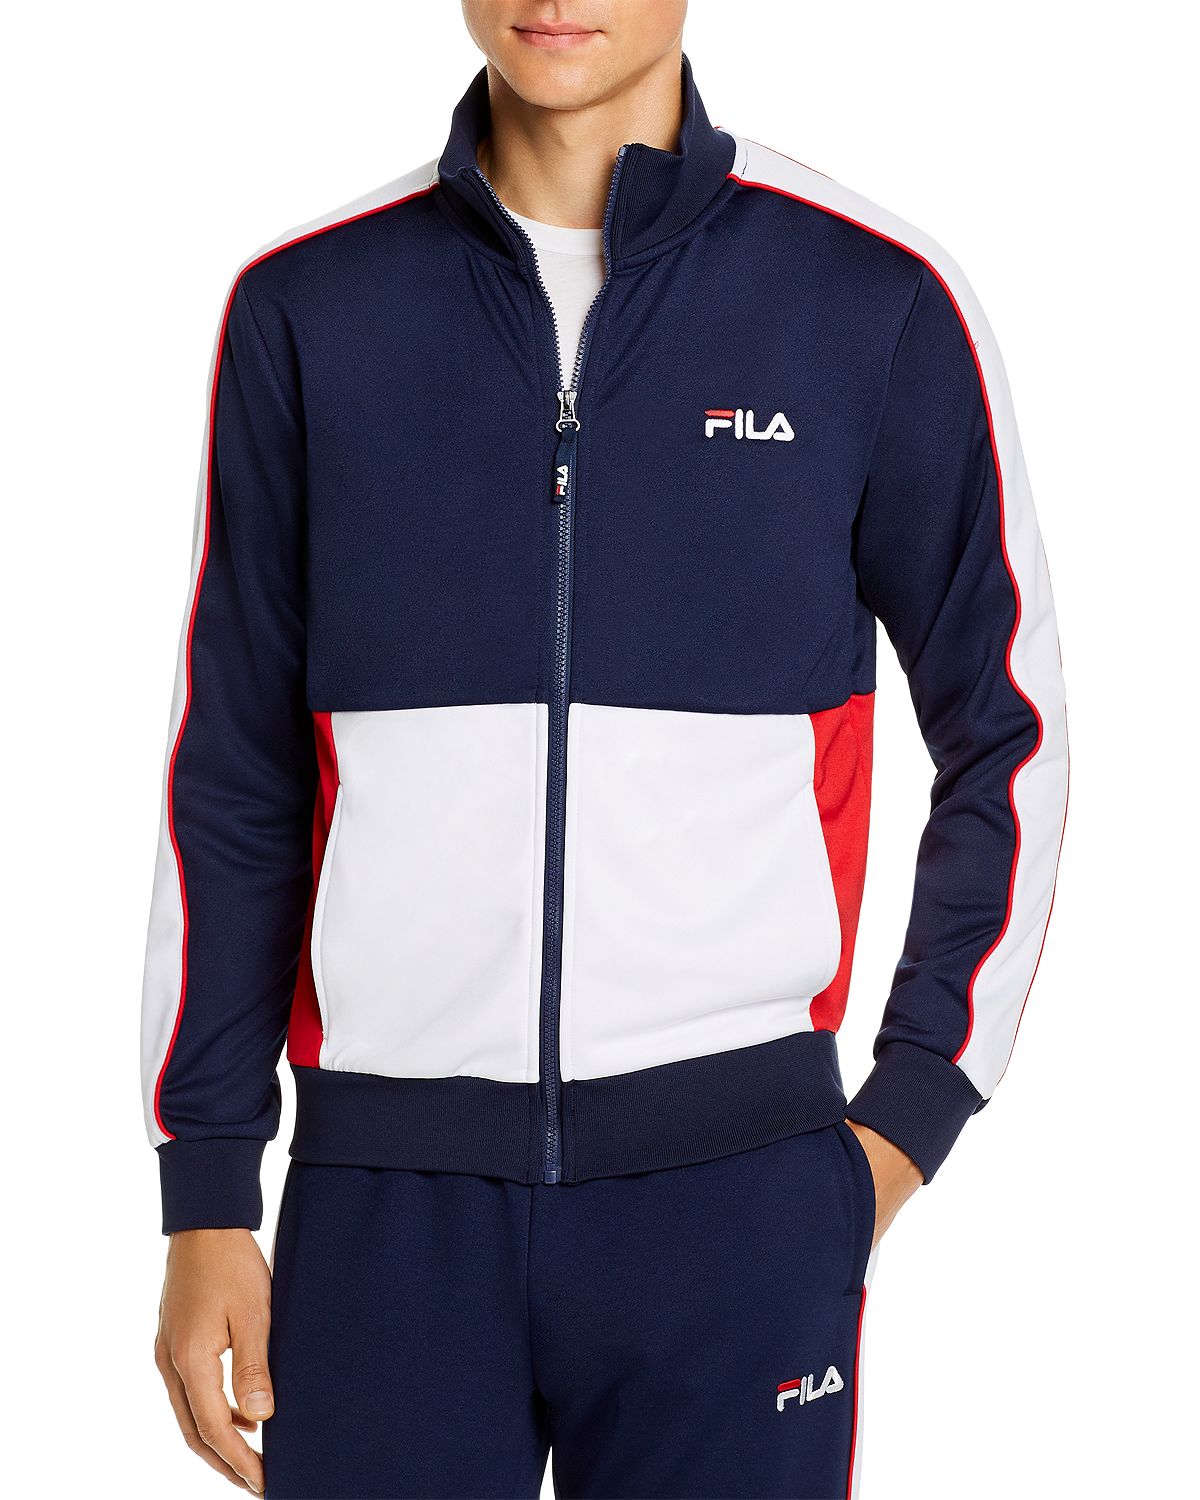 Fila Michele Color-block Track Jacket Navy/White/Red